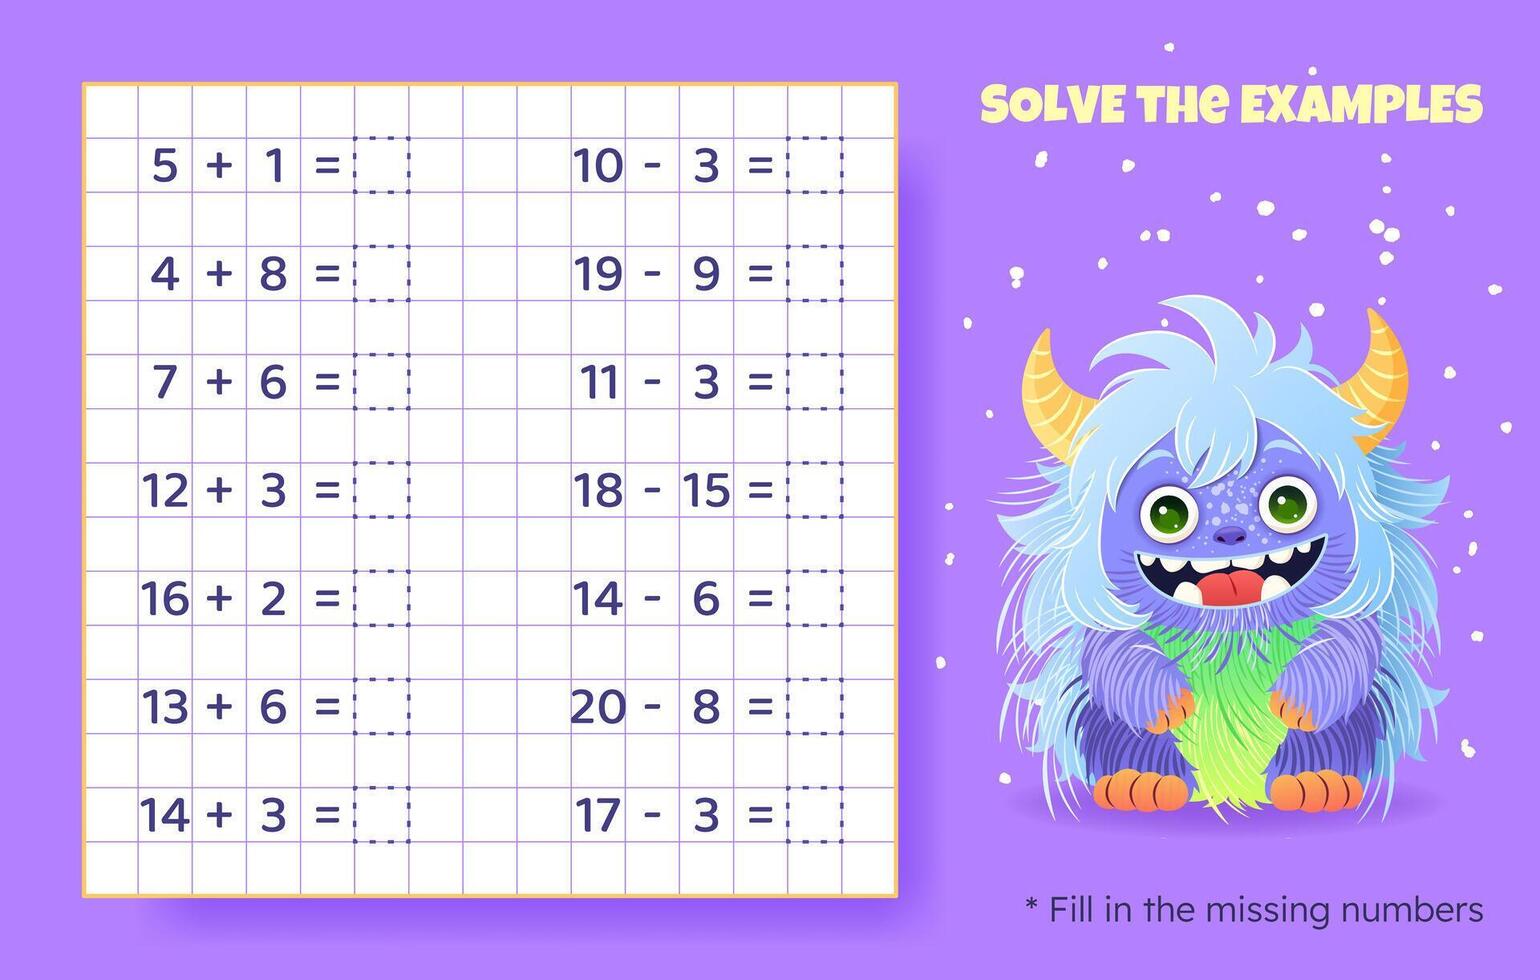 Solve the examples. Addition and subtraction up to 20. Mathematical puzzle game. Worksheet for school, preschool kids. Vector illustration. Cartoon educational game with cute monster for children.